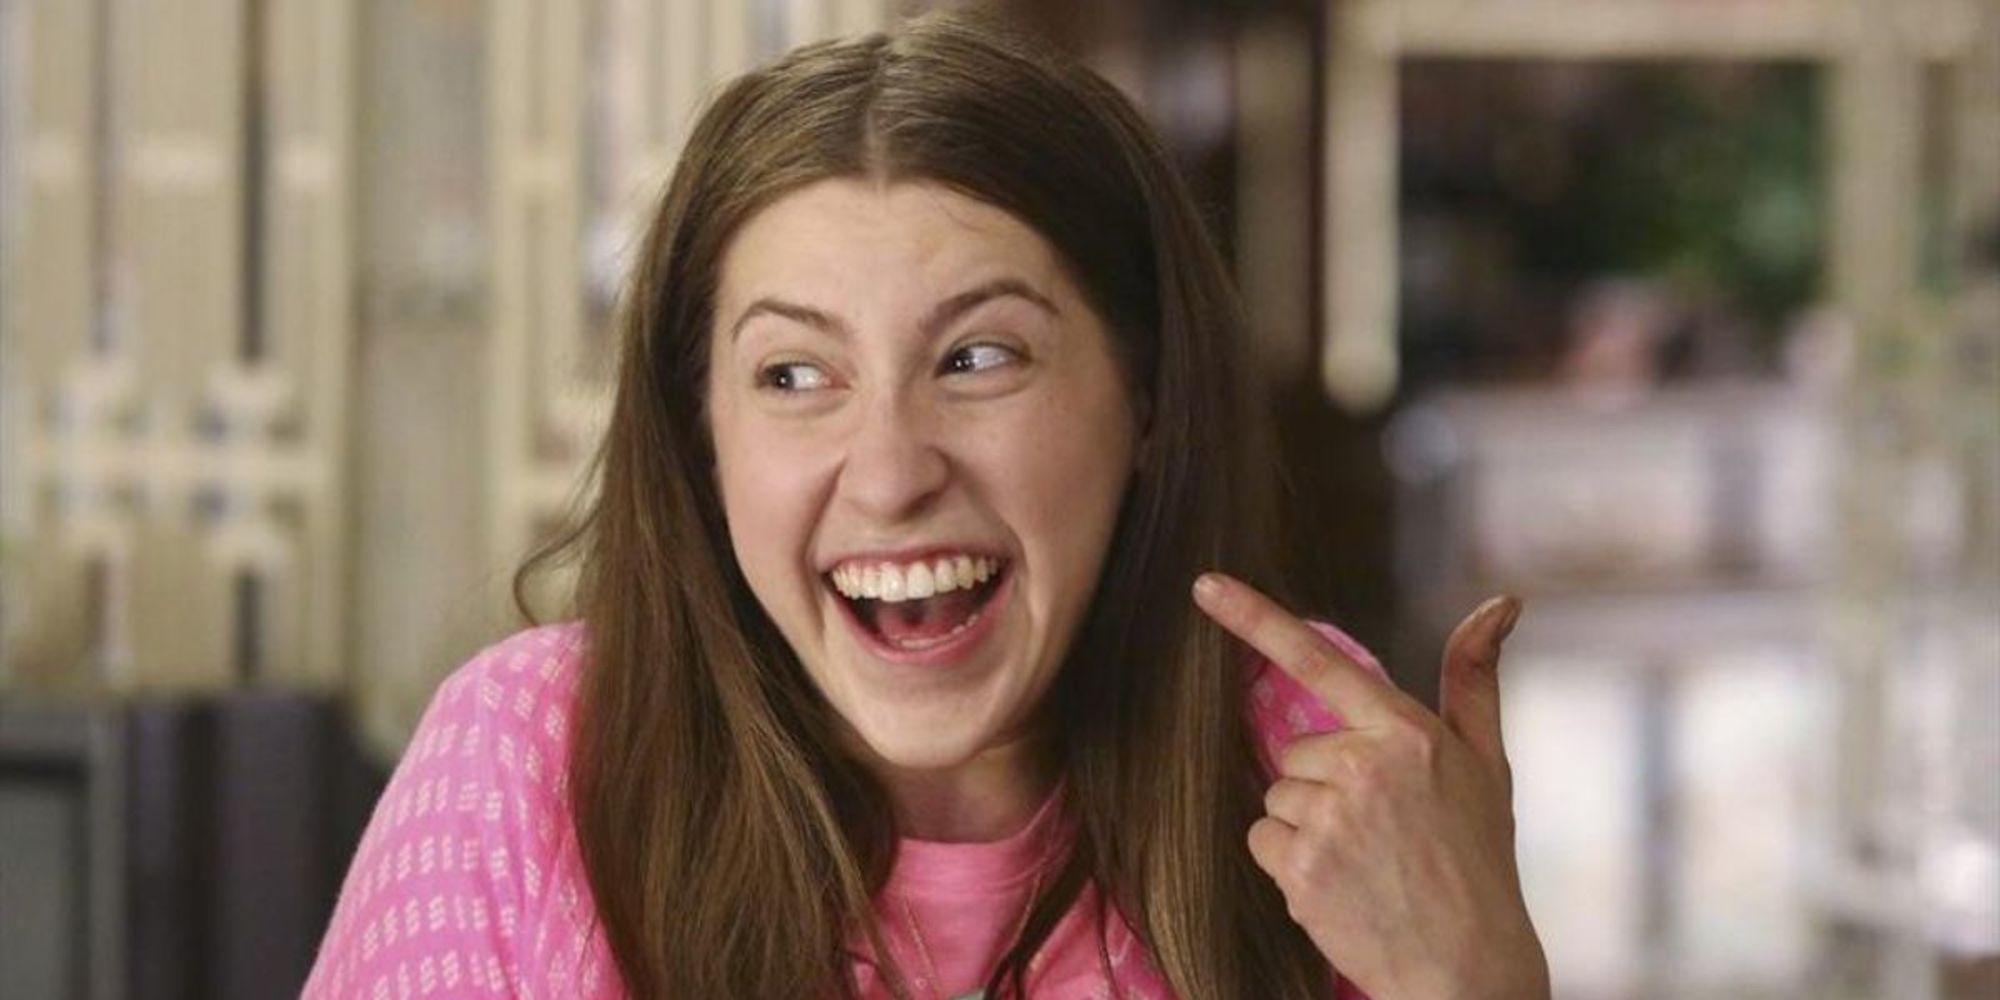 Sue Heck from The Middle pointing her finger and smiling